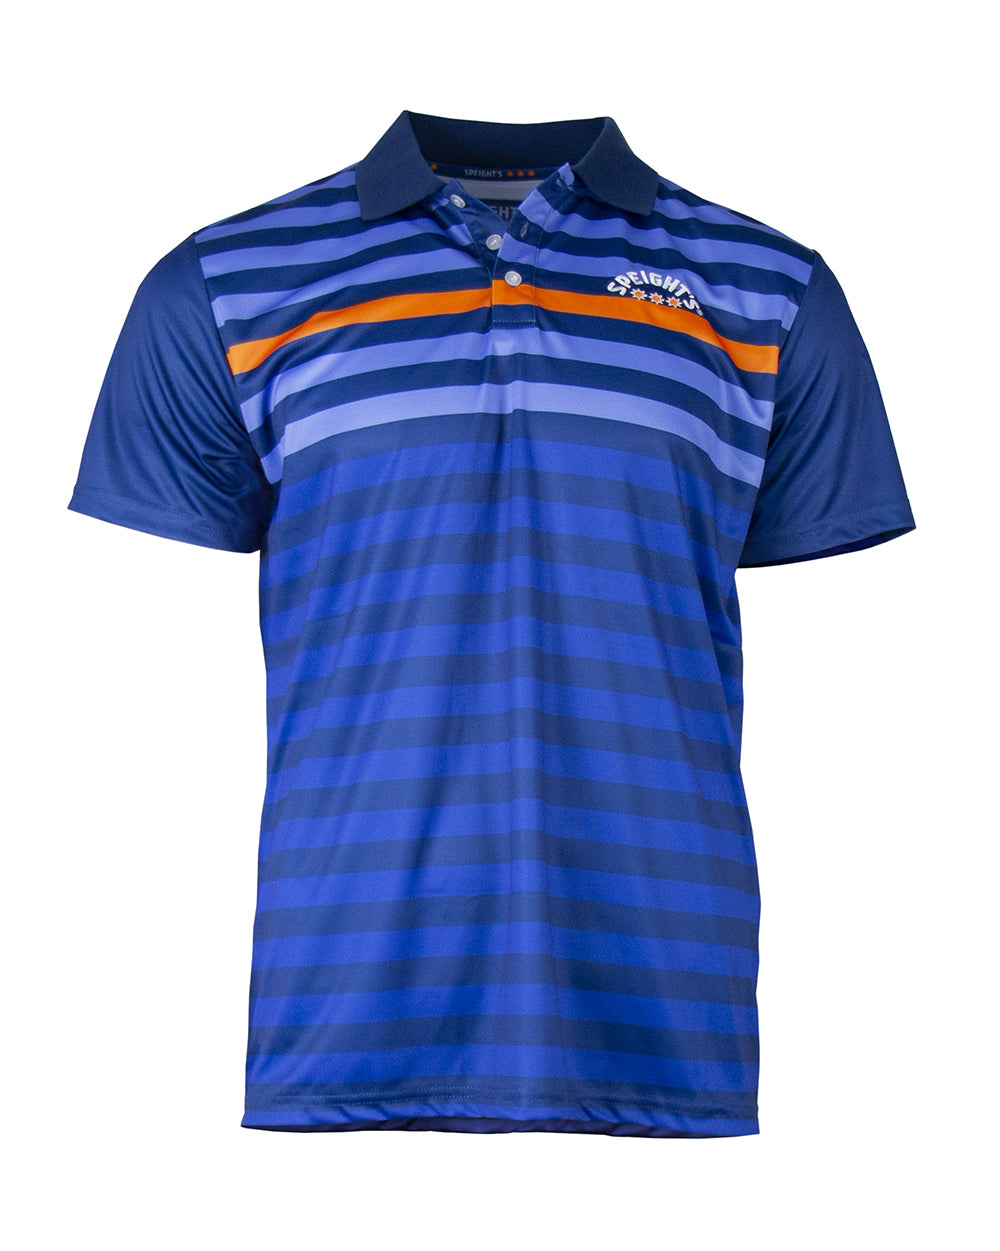 Speight's Striped Polo Shirt -  Beer Gear Apparel & Merchandise - Speights - Lion Red - VB - Tokyo Dy merch